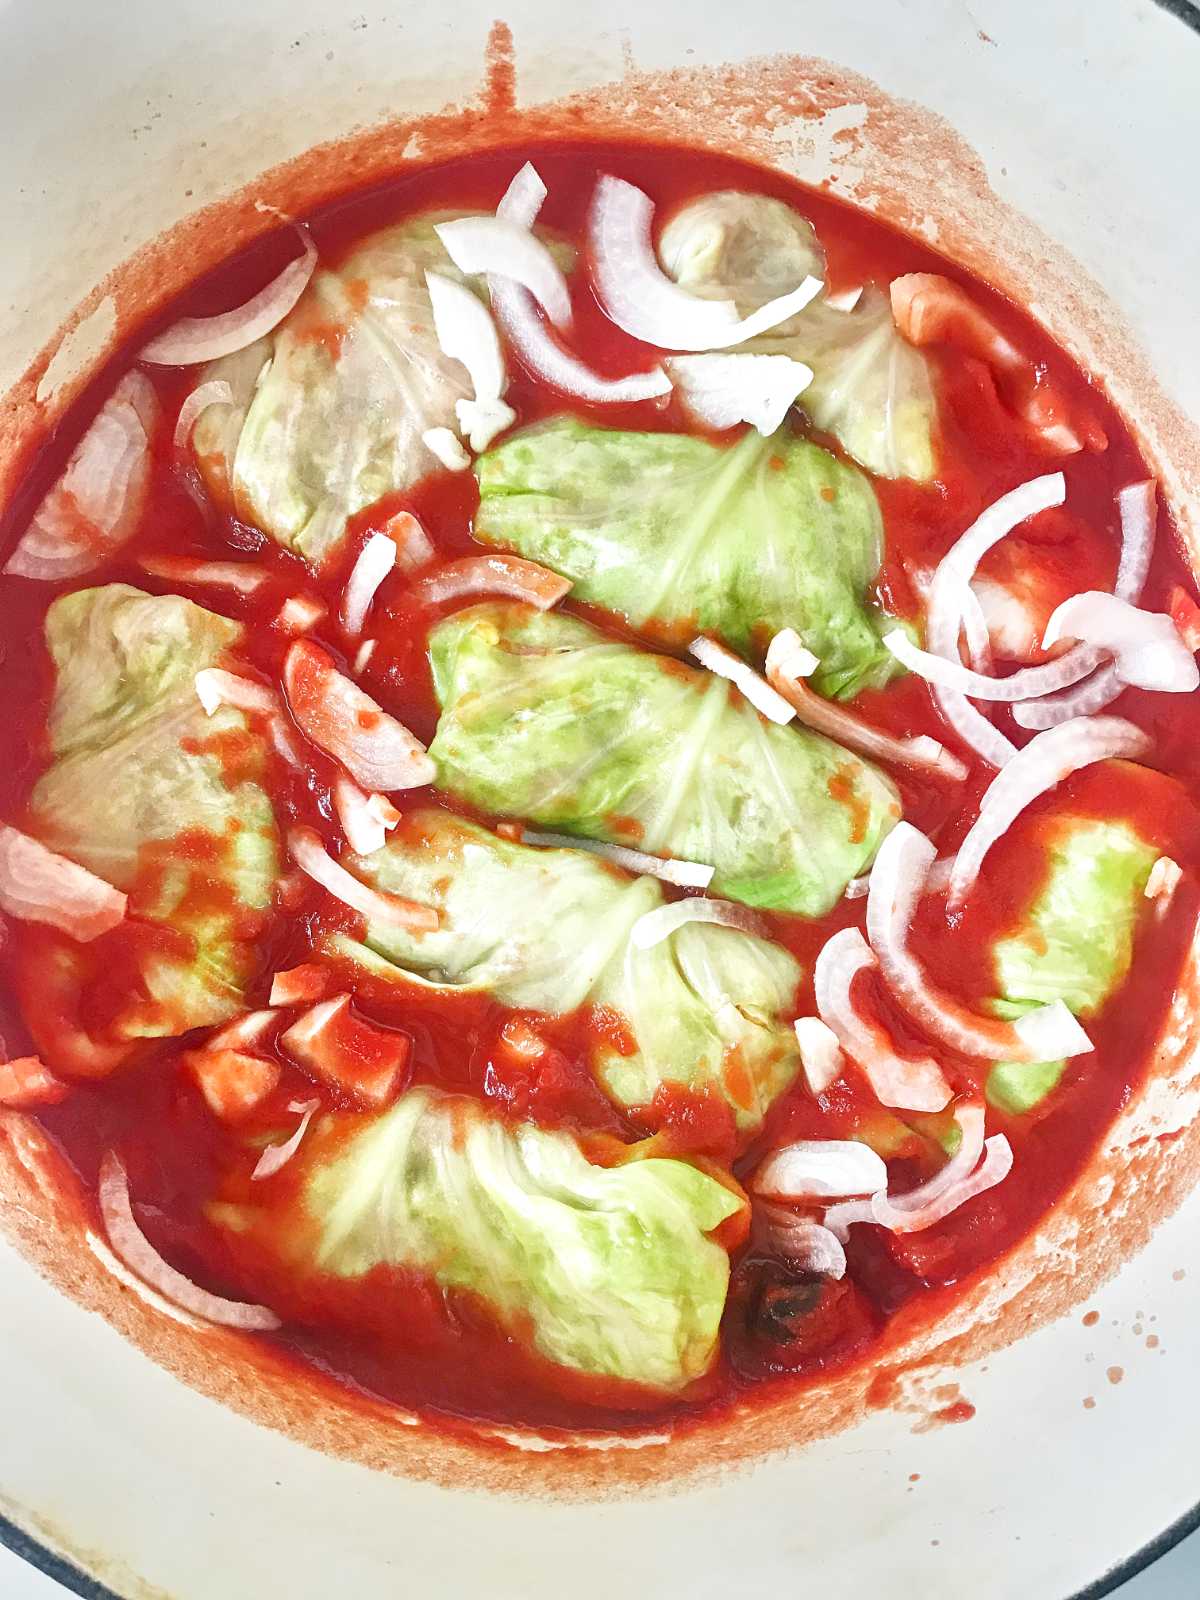 Cabbage rolls in red sauce with onions.